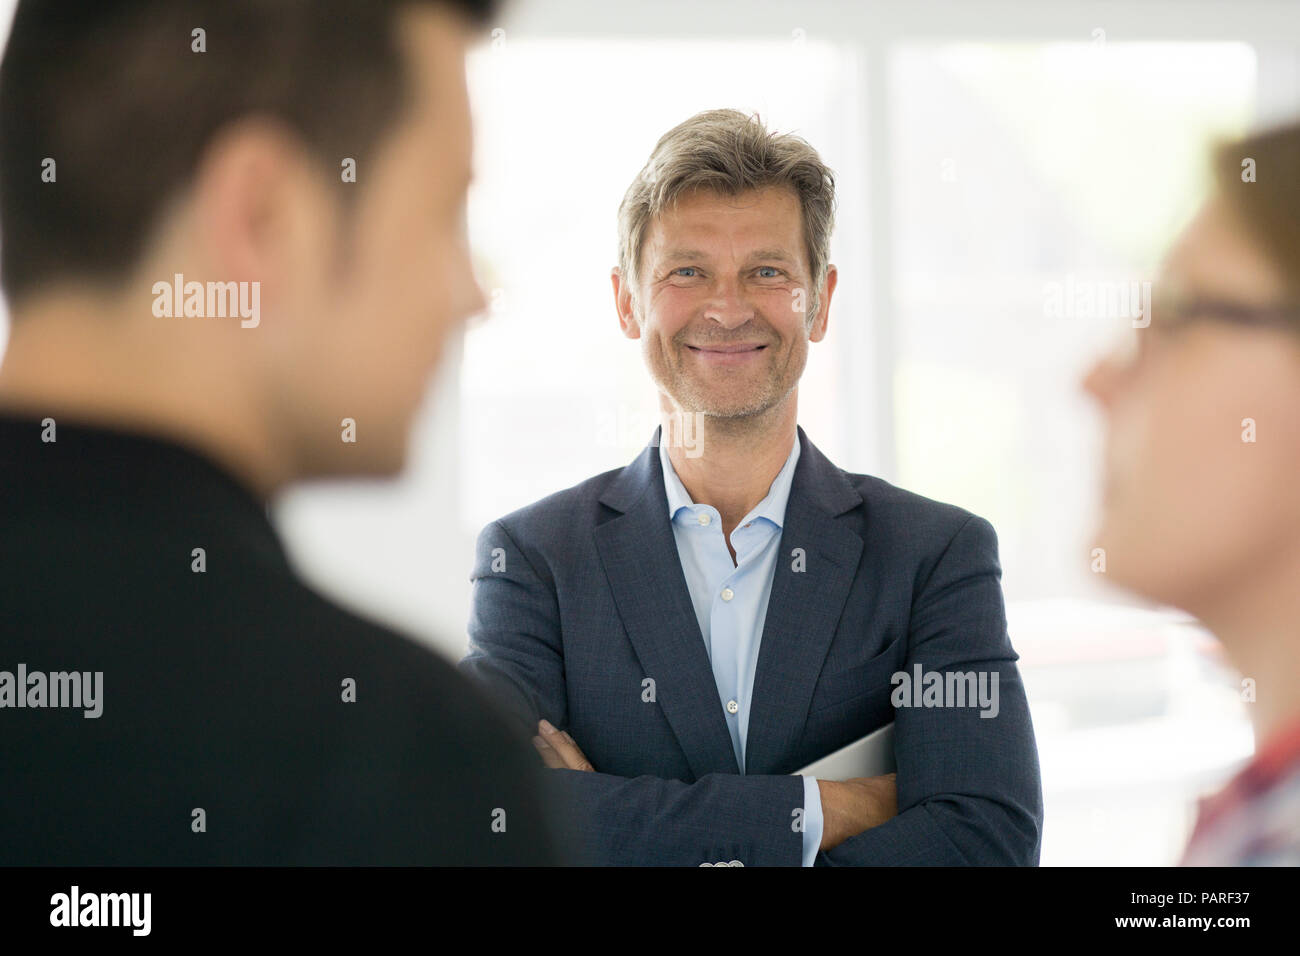 Portrait of smiling man in suit with couple Stock Photo